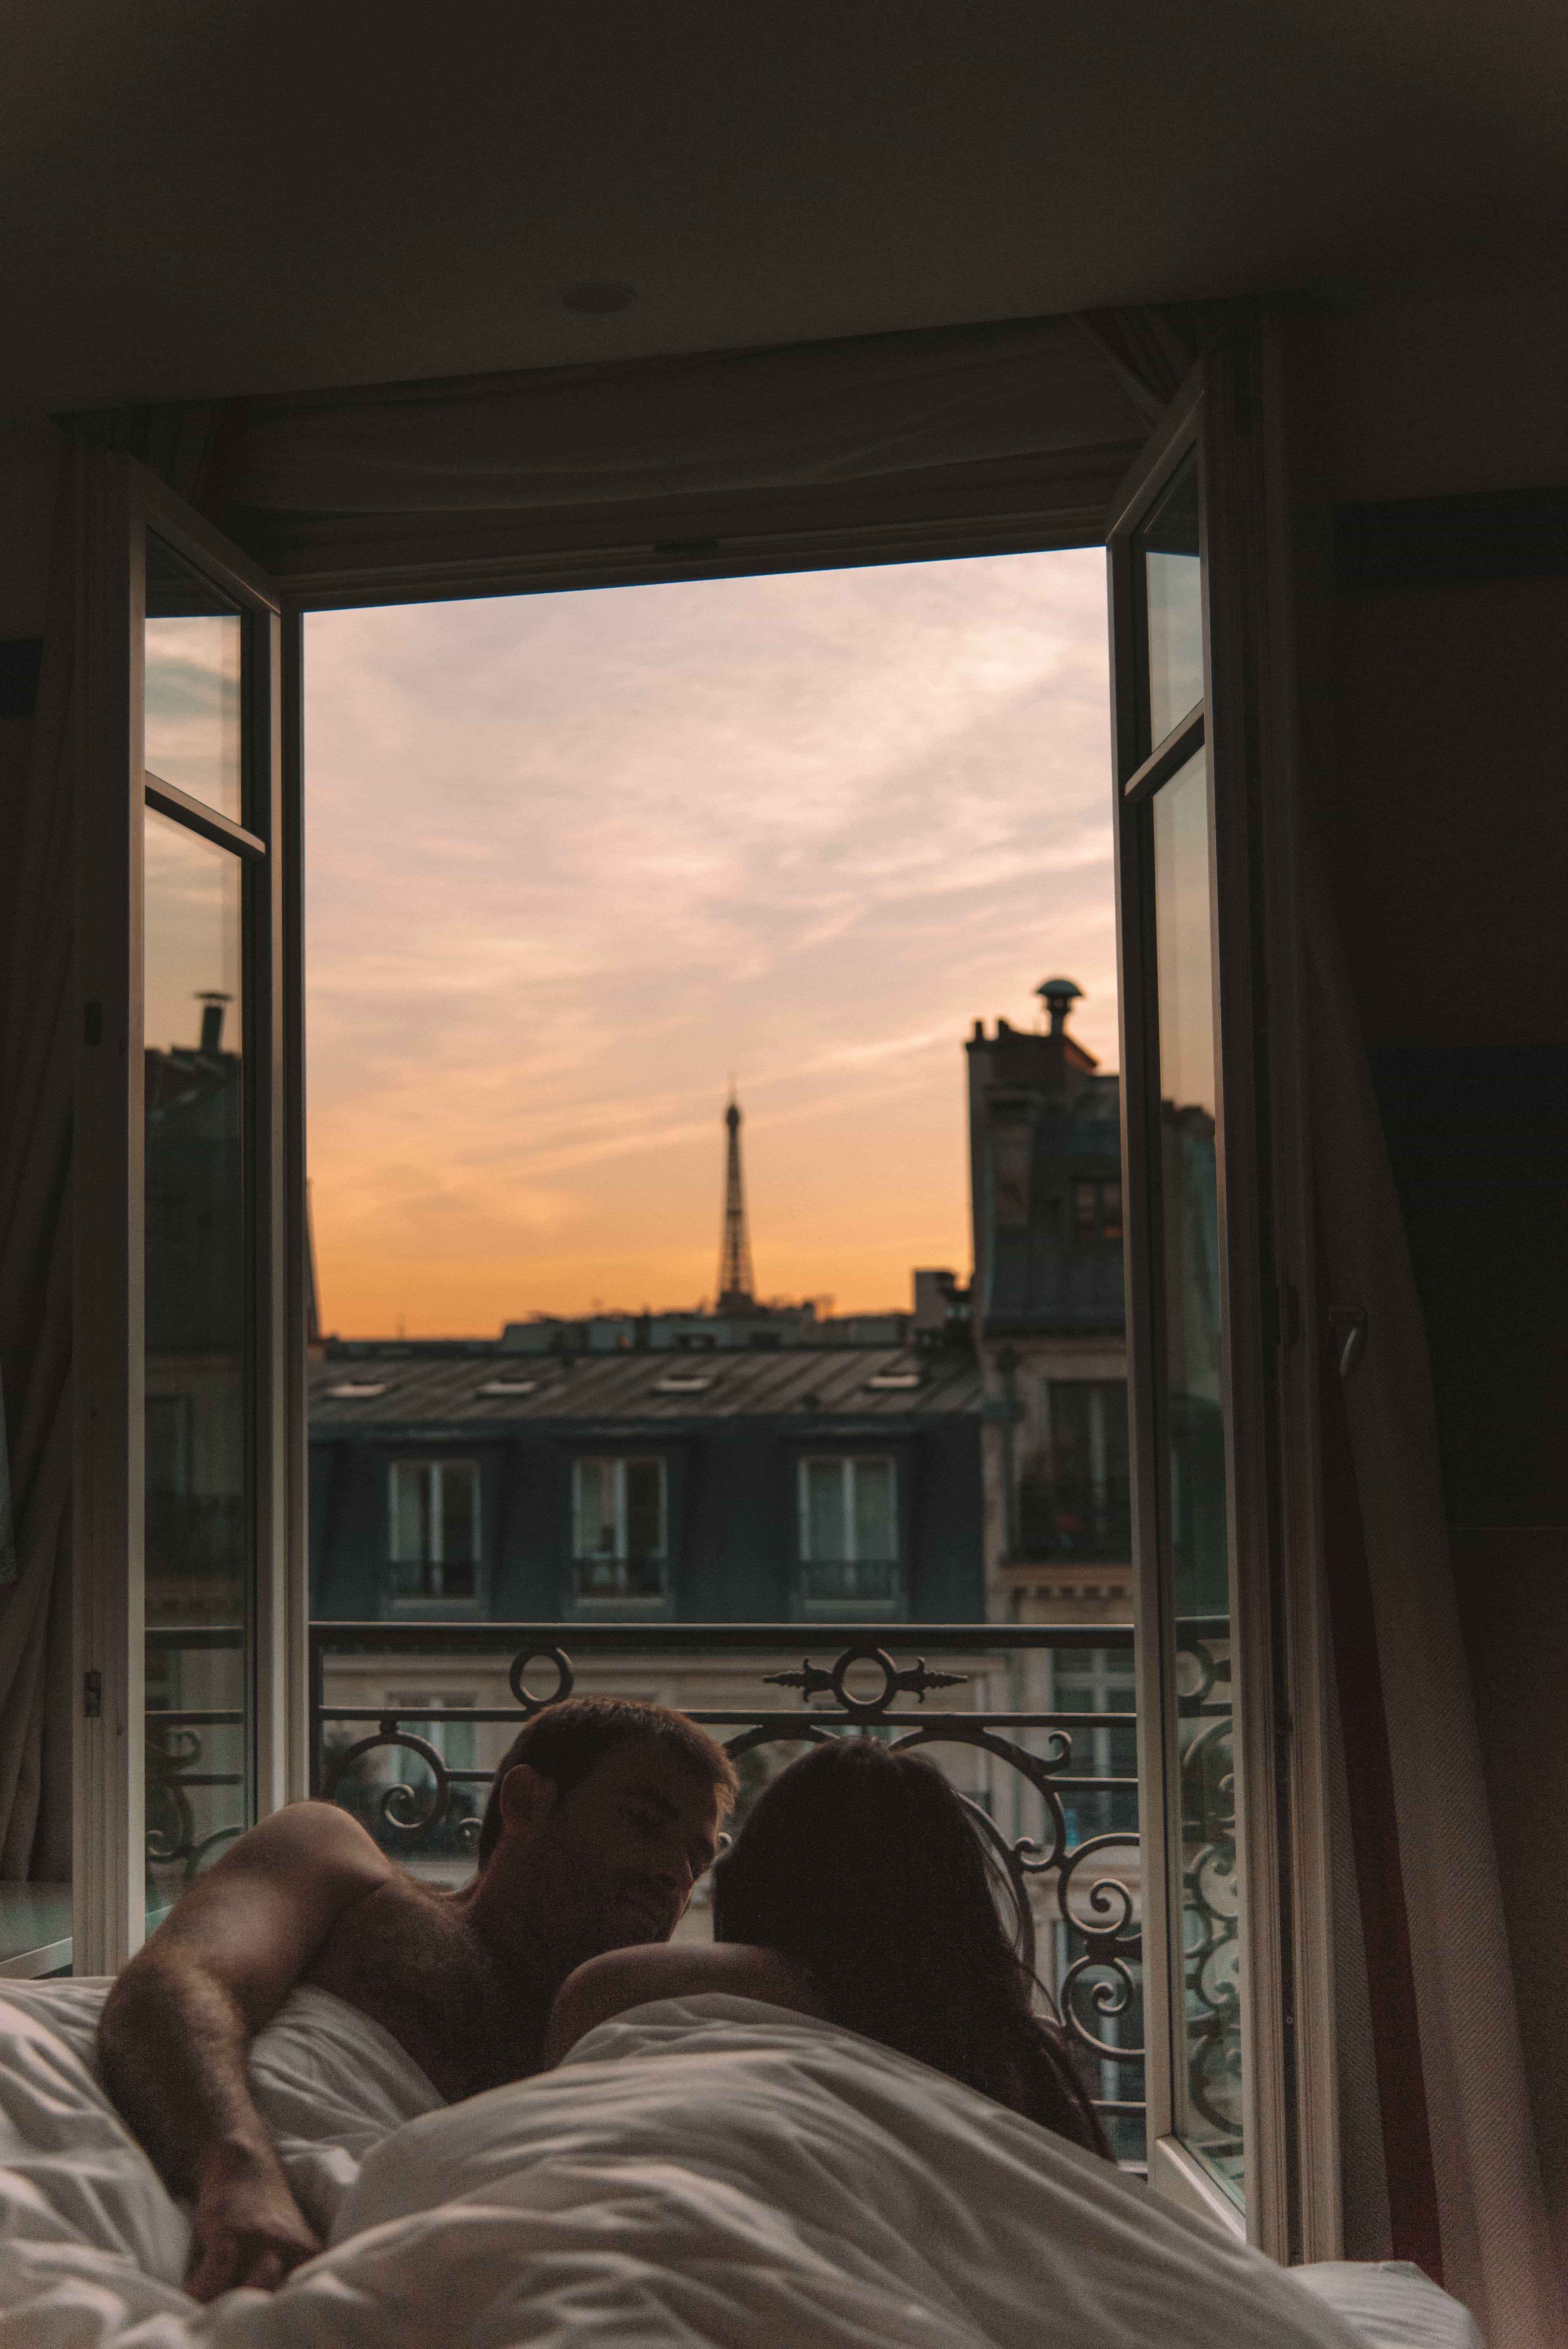 Most Instagrammable places in Paris, Room with a view